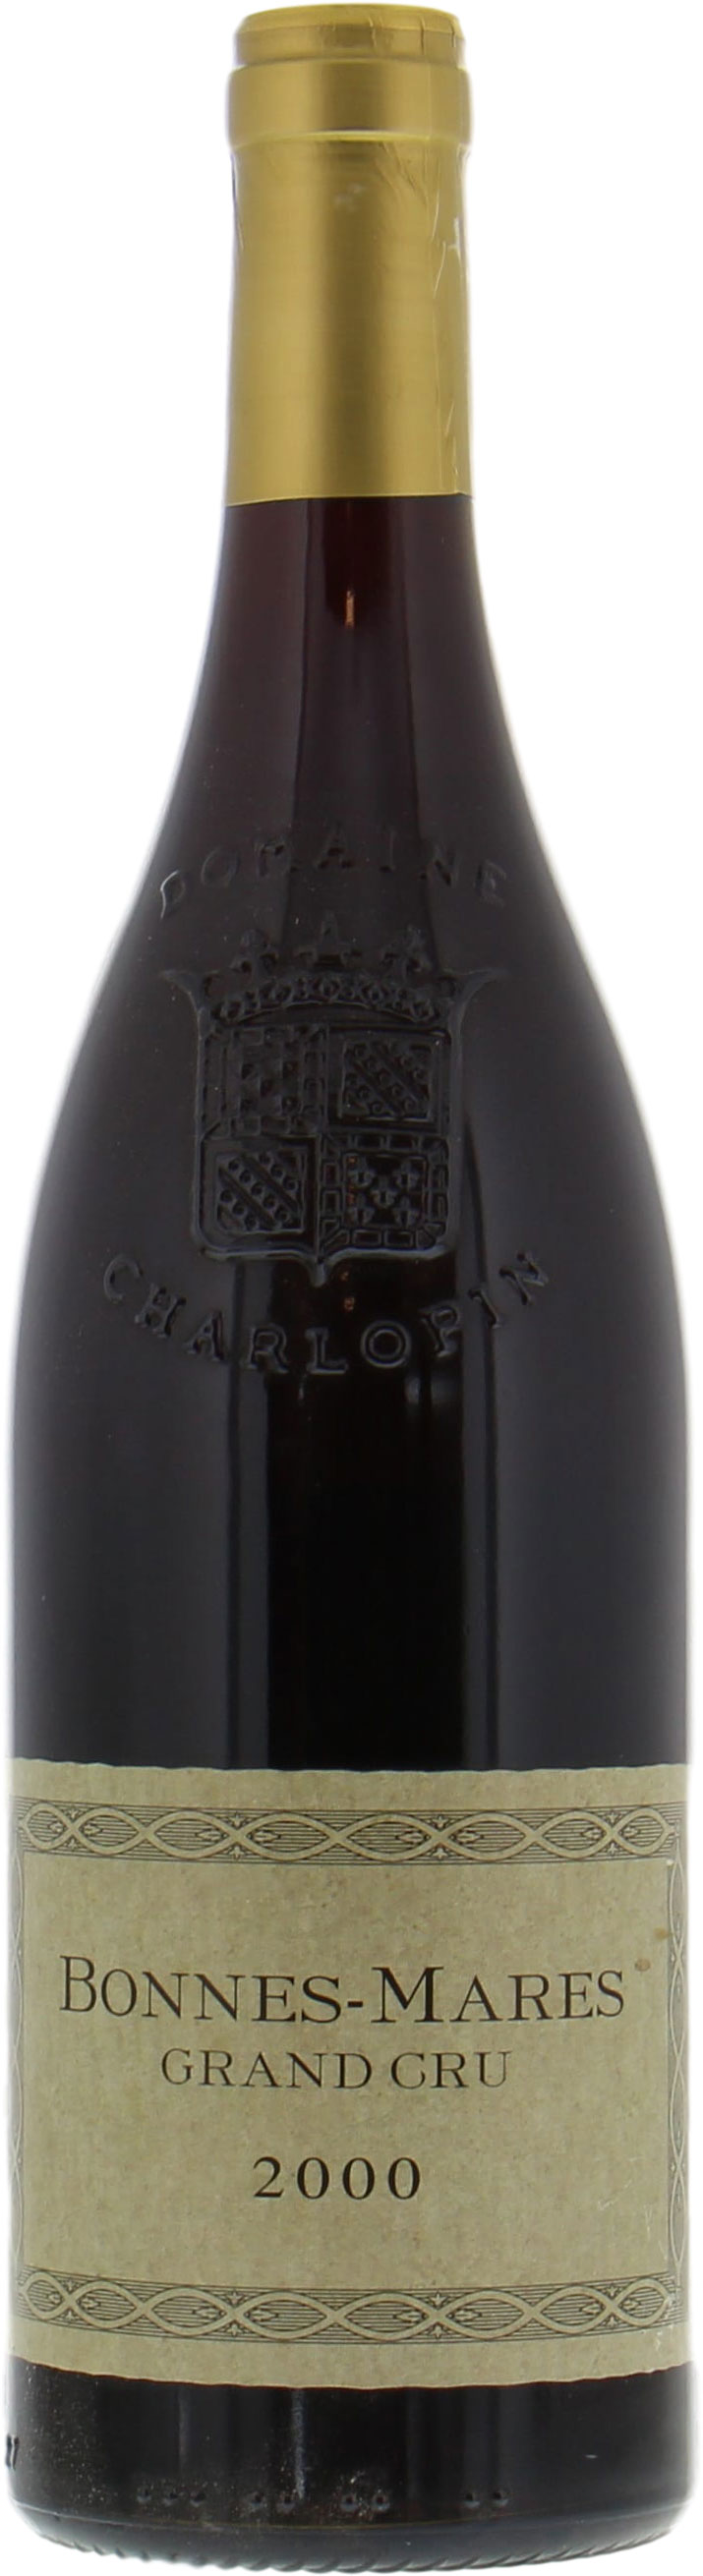 Charlopin - Bonnes Mares 2000 Perfect